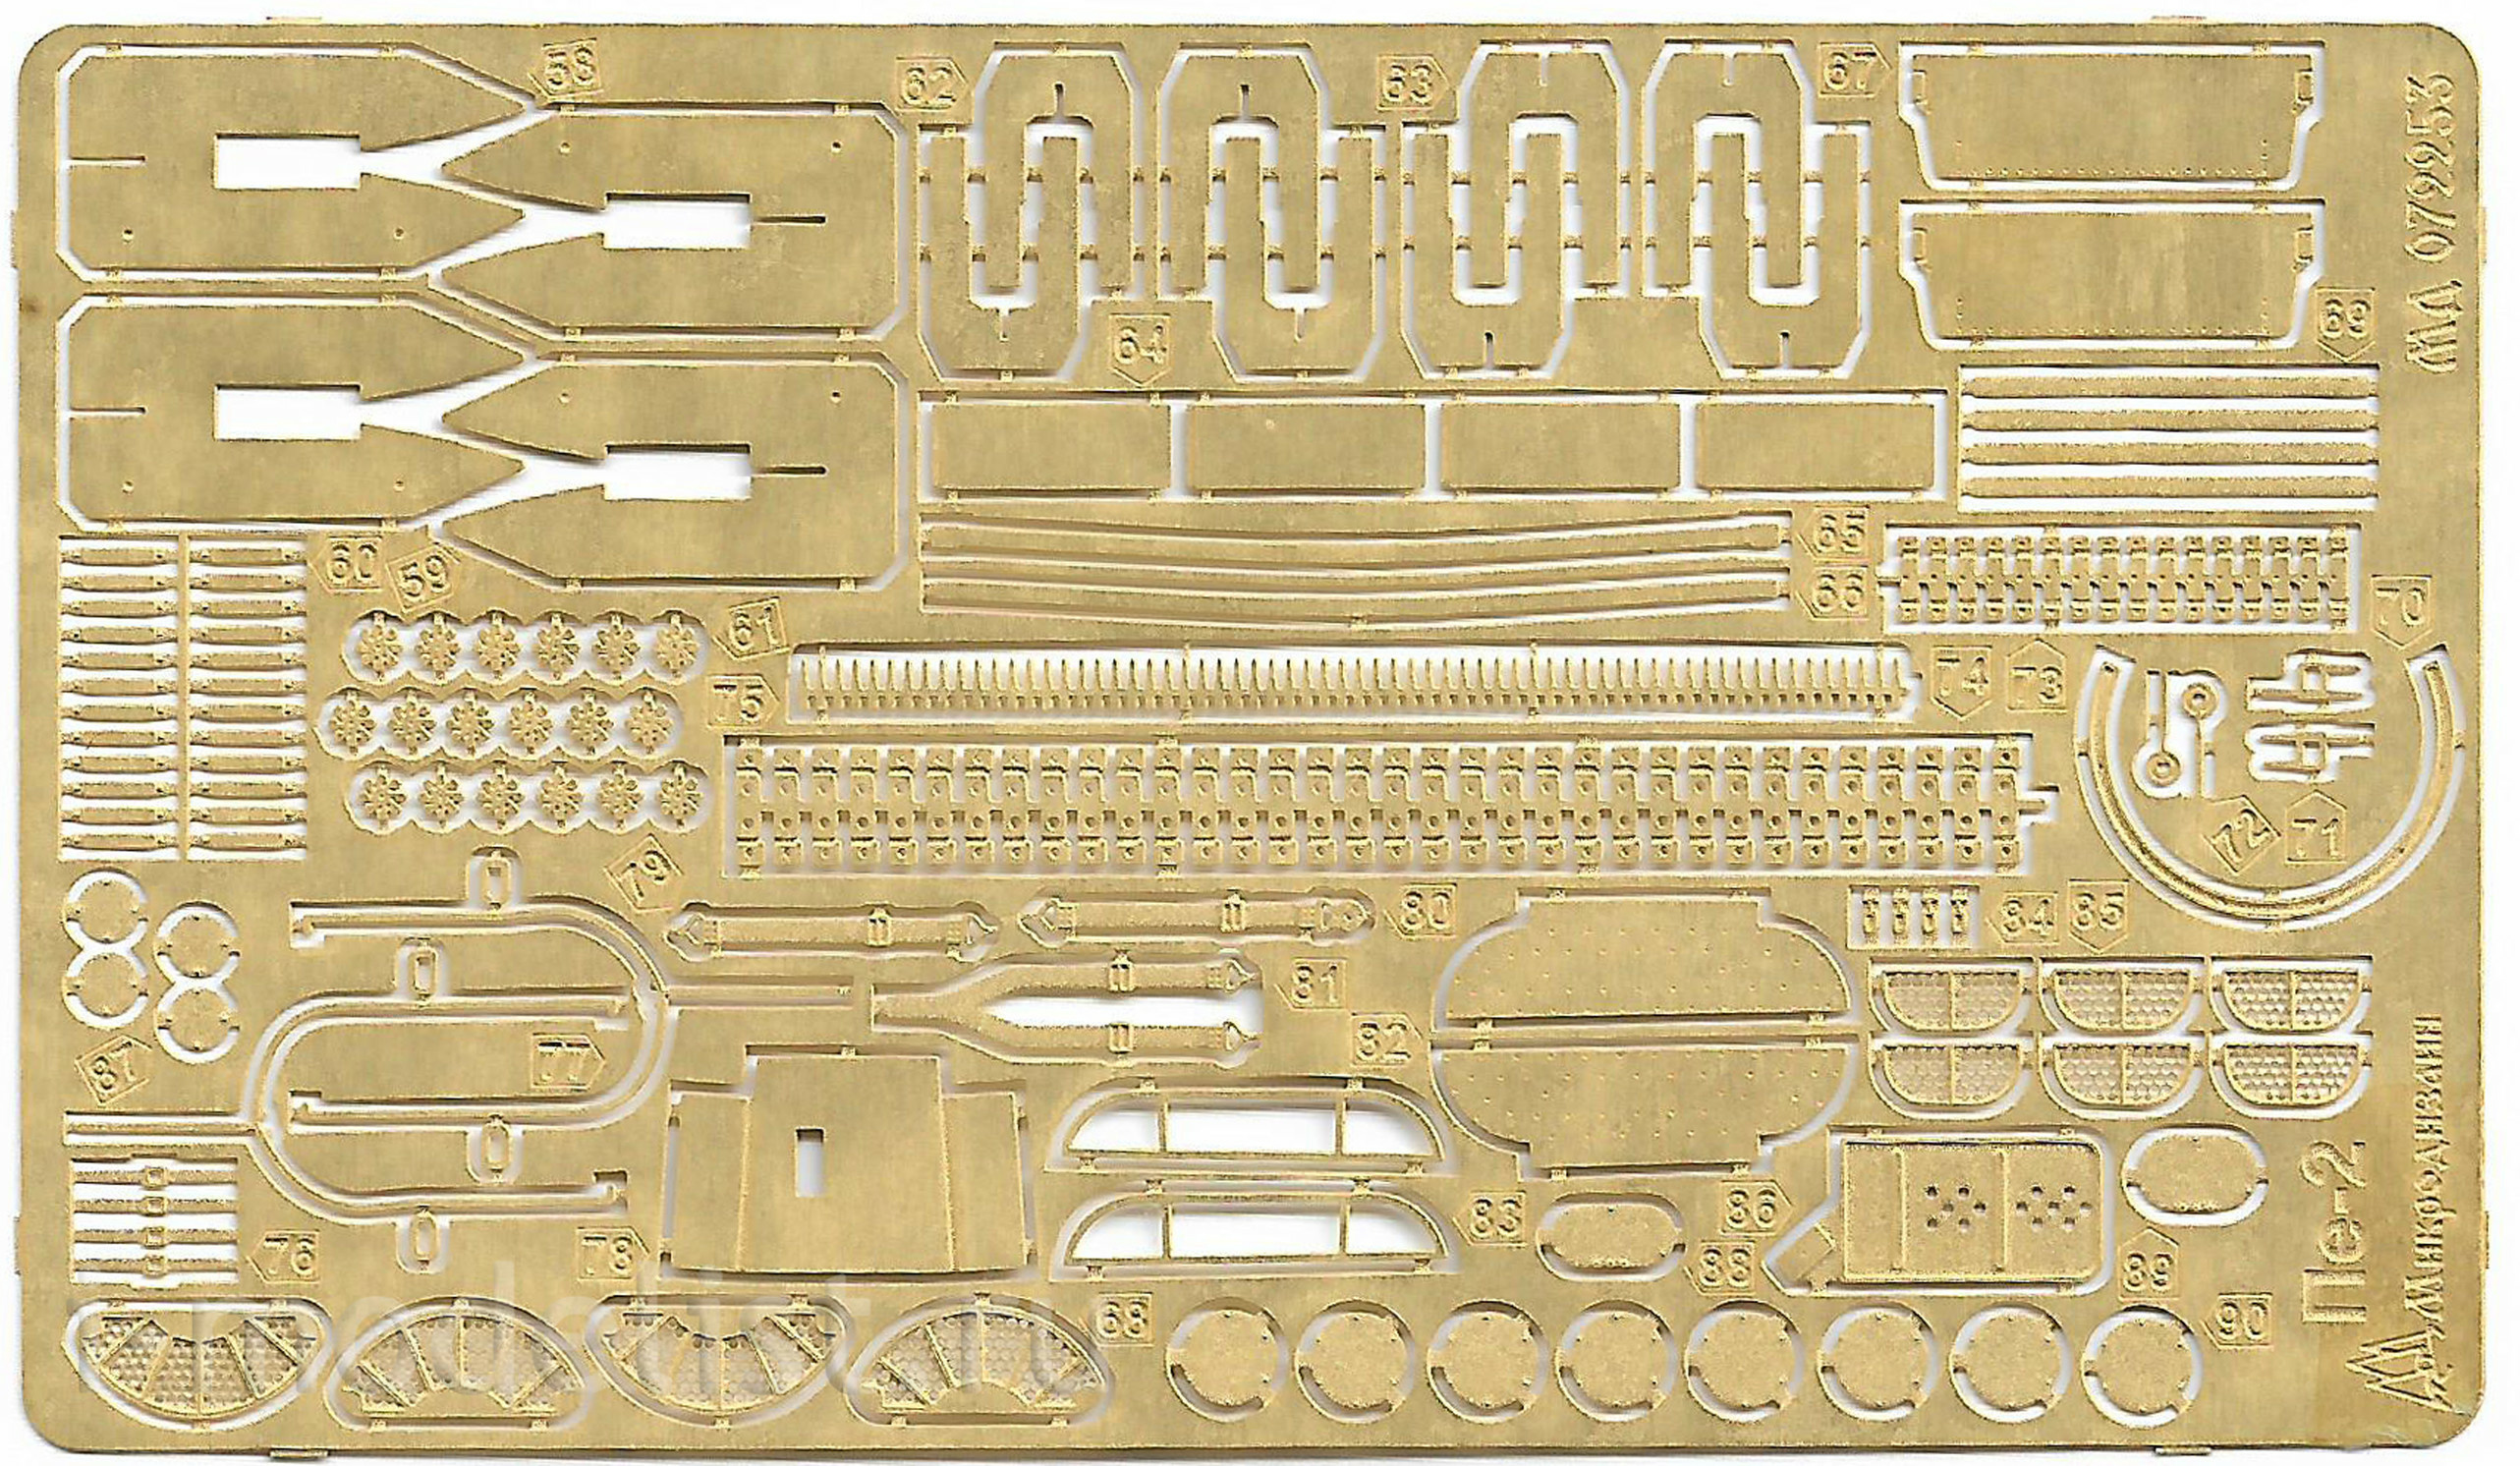 072253 Microdesign 1/72 photo etching Kit for PE-2